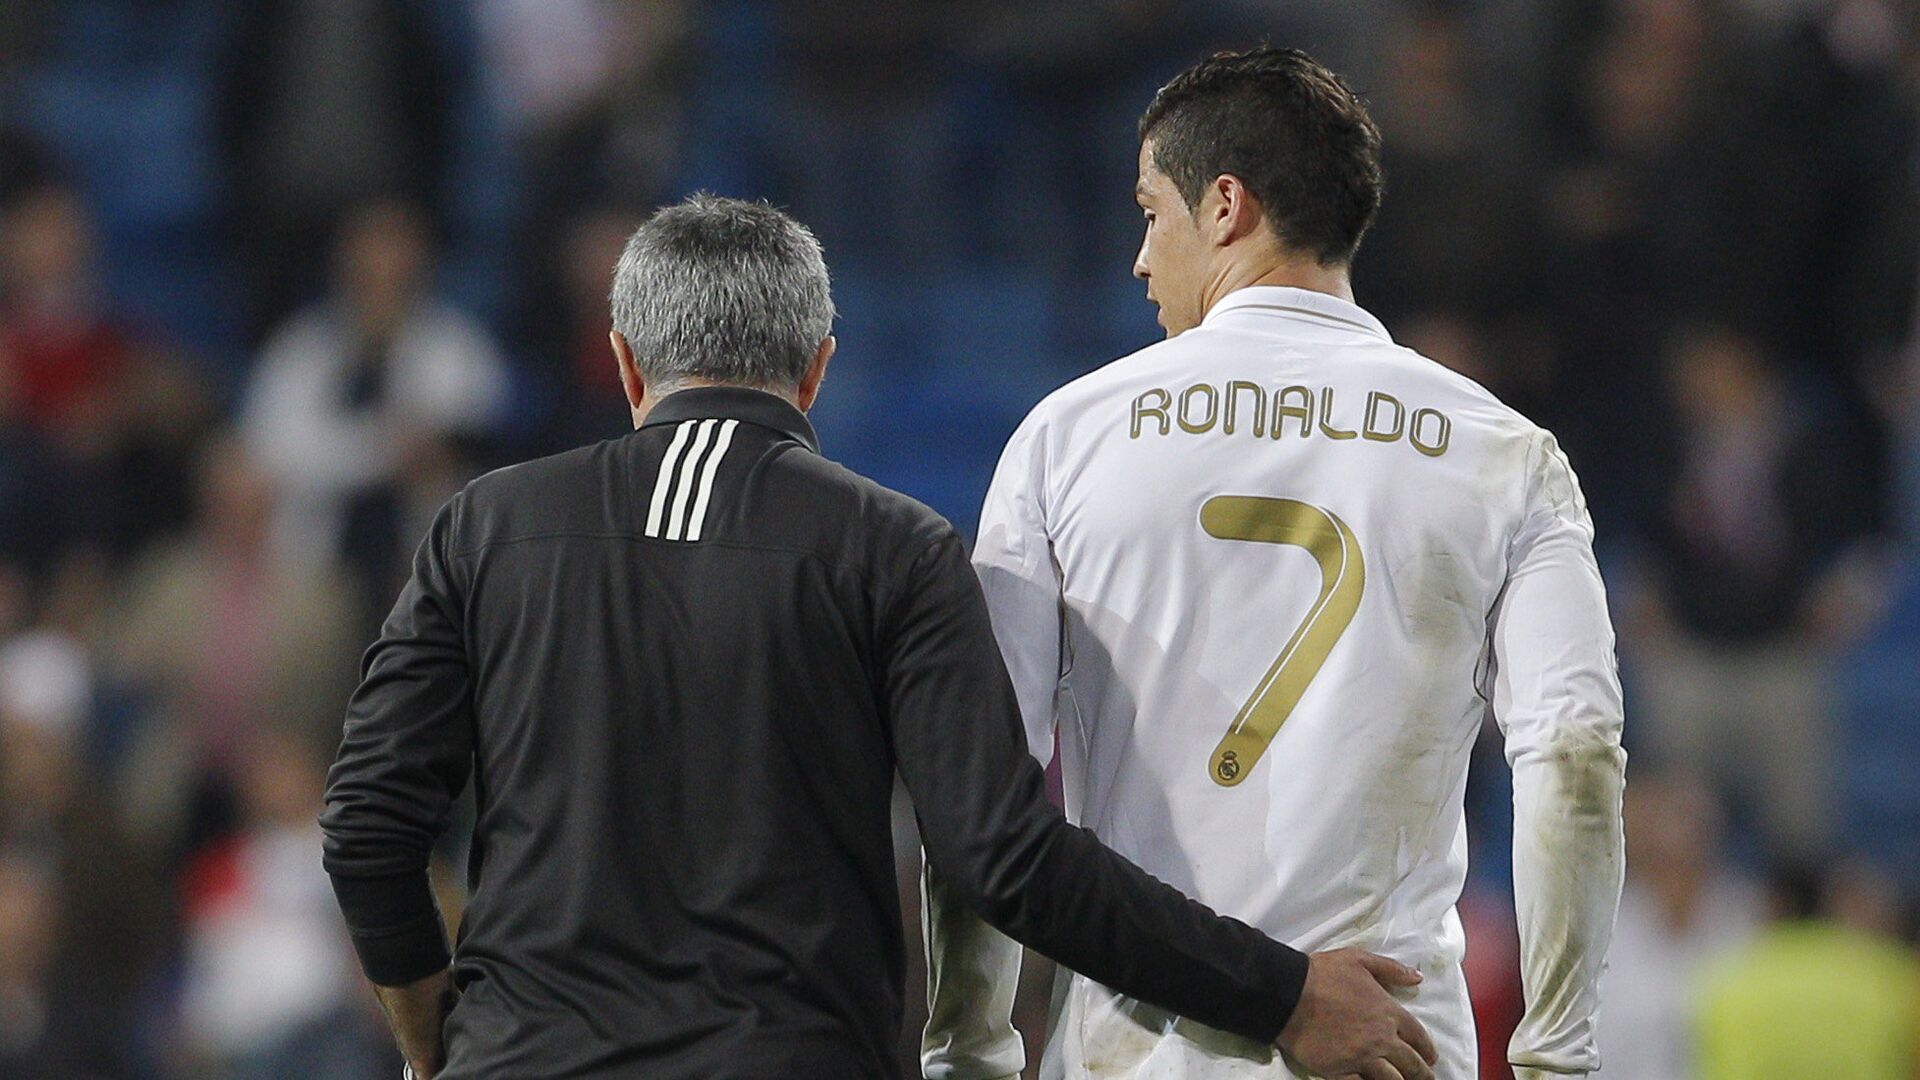 Real Madrid's coach Jose Mourinho from Portugal embraces Cristiano Ronaldo from Portugal after a Champions League round of 16, second leg soccer match against CSKA Moscow's at the Santiago Bernabeu Stadium, in Madrid, Wednesday, March 14, 2012 - اسپوتنیک افغانستان  , 1920, 26.06.2022